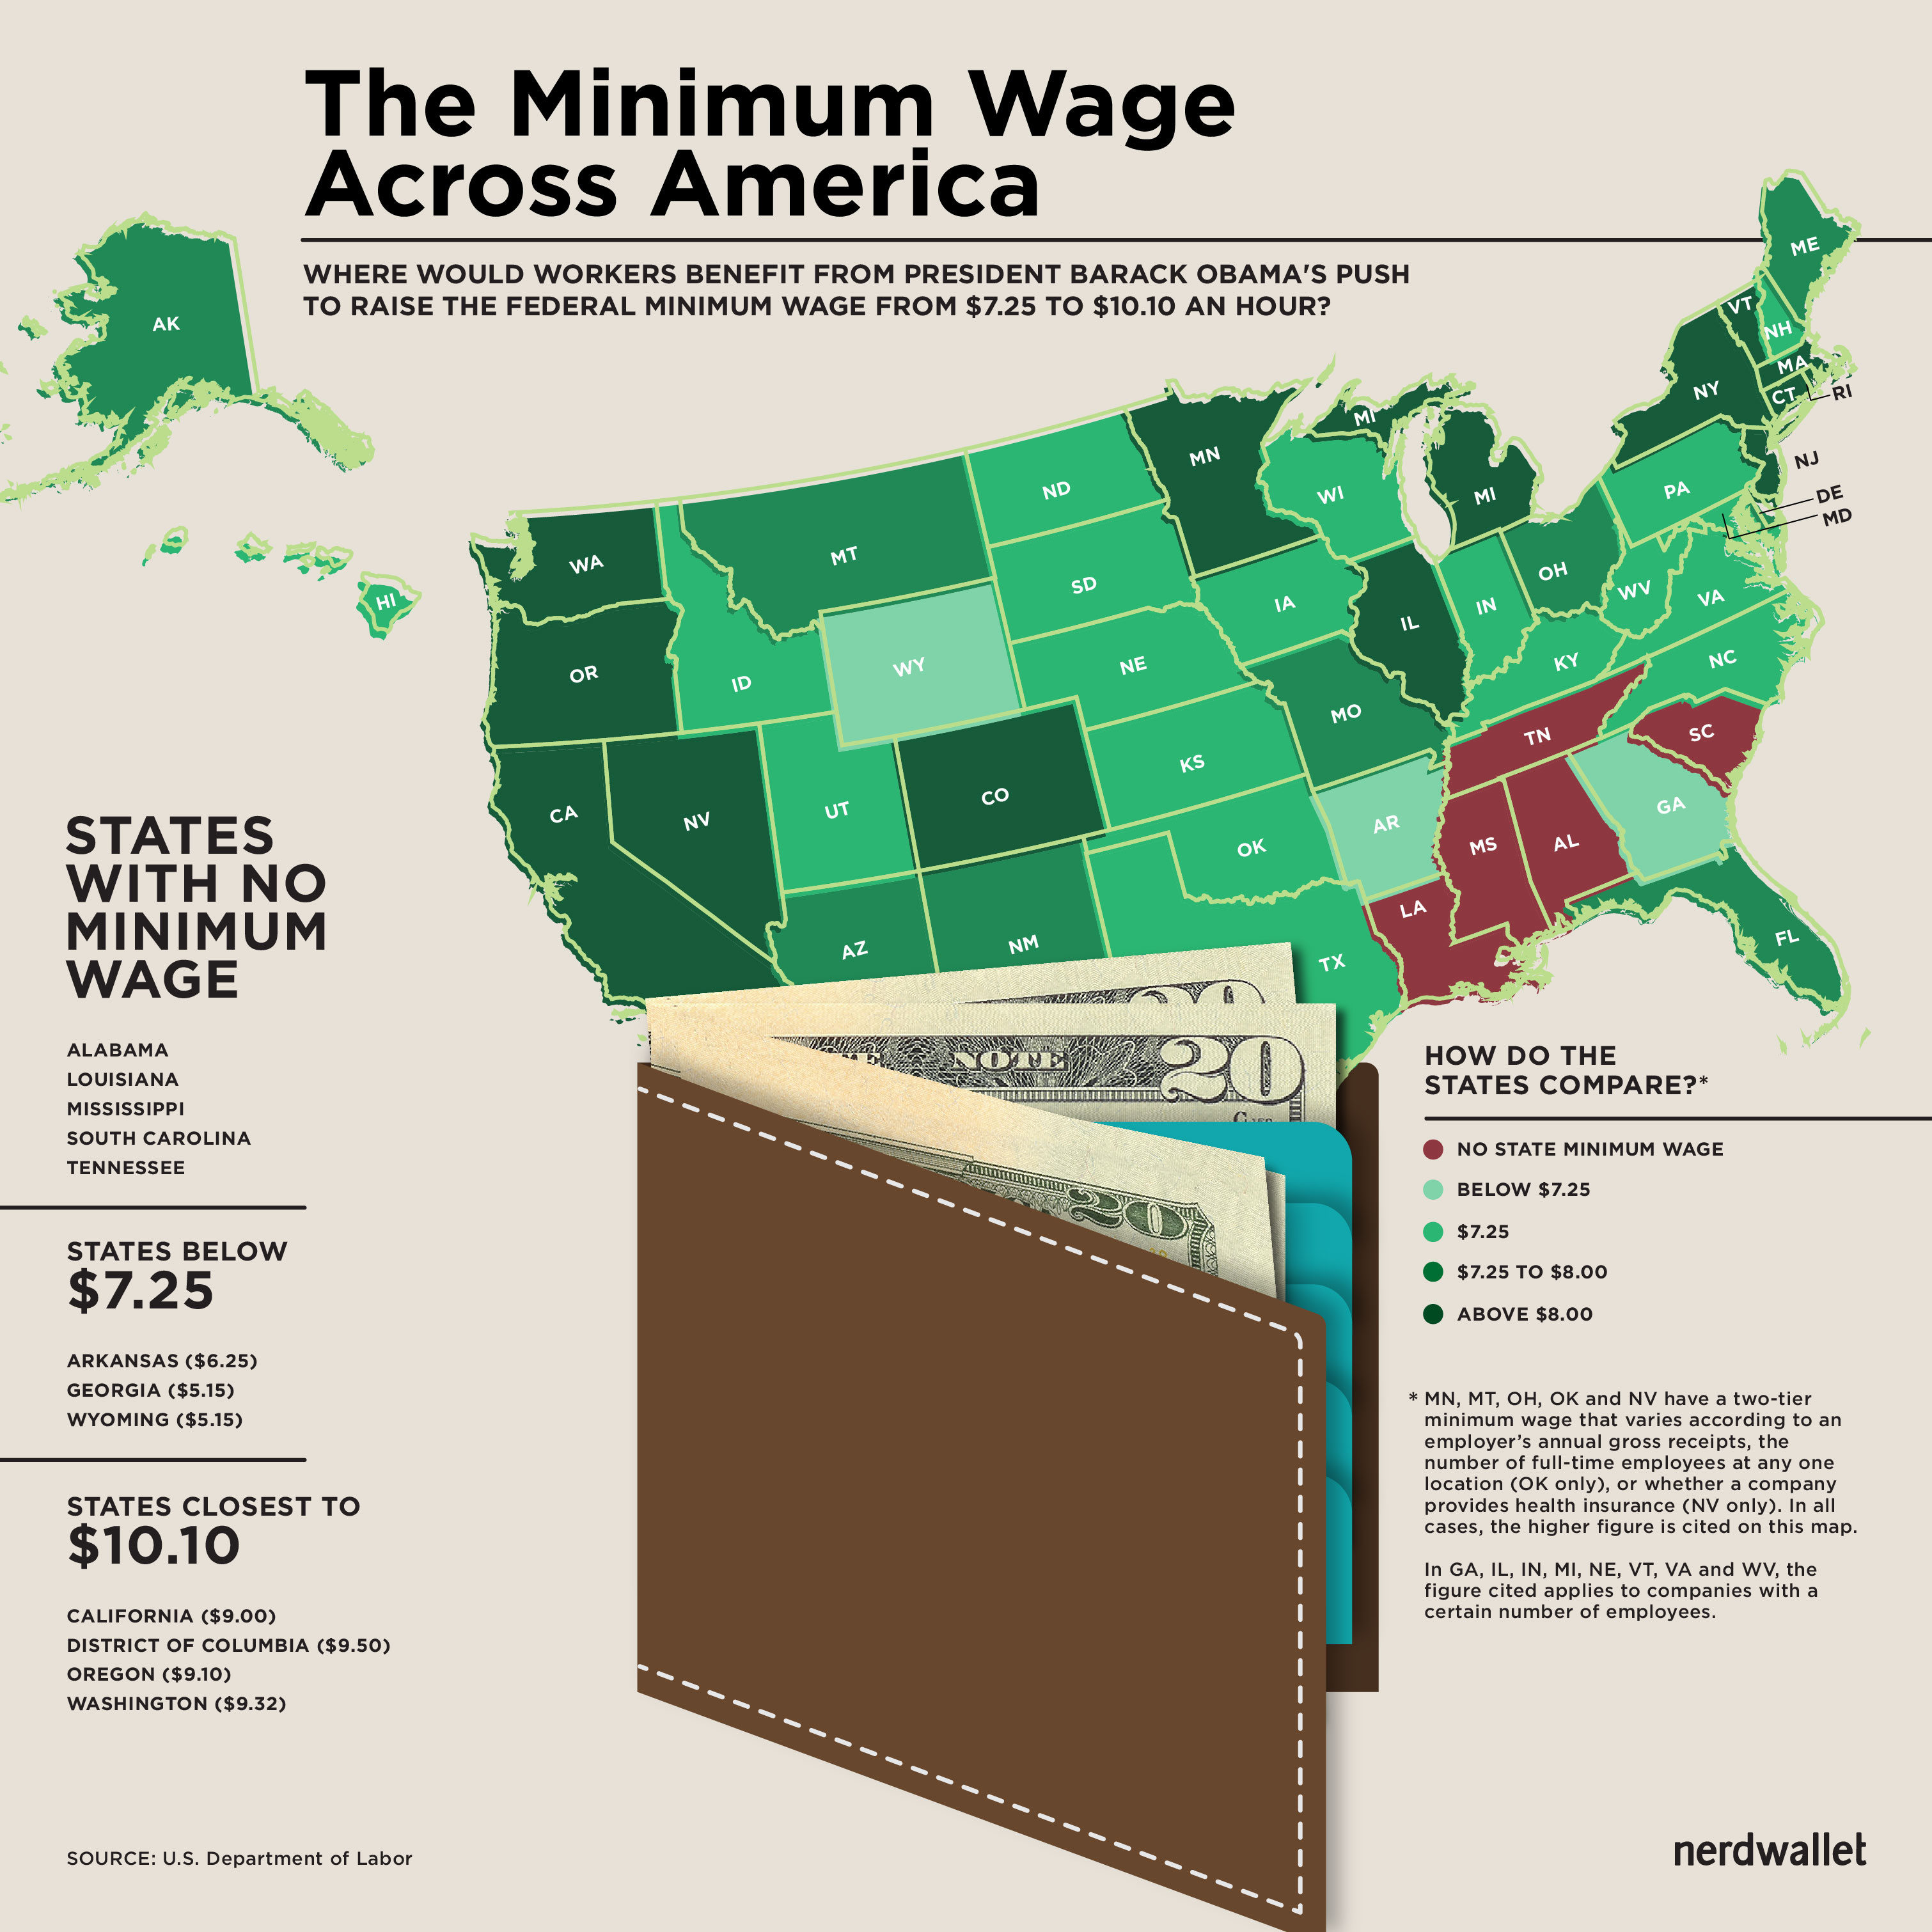 proposed_minimum_wage_boost_map_chart_1450px_092014-150ppi